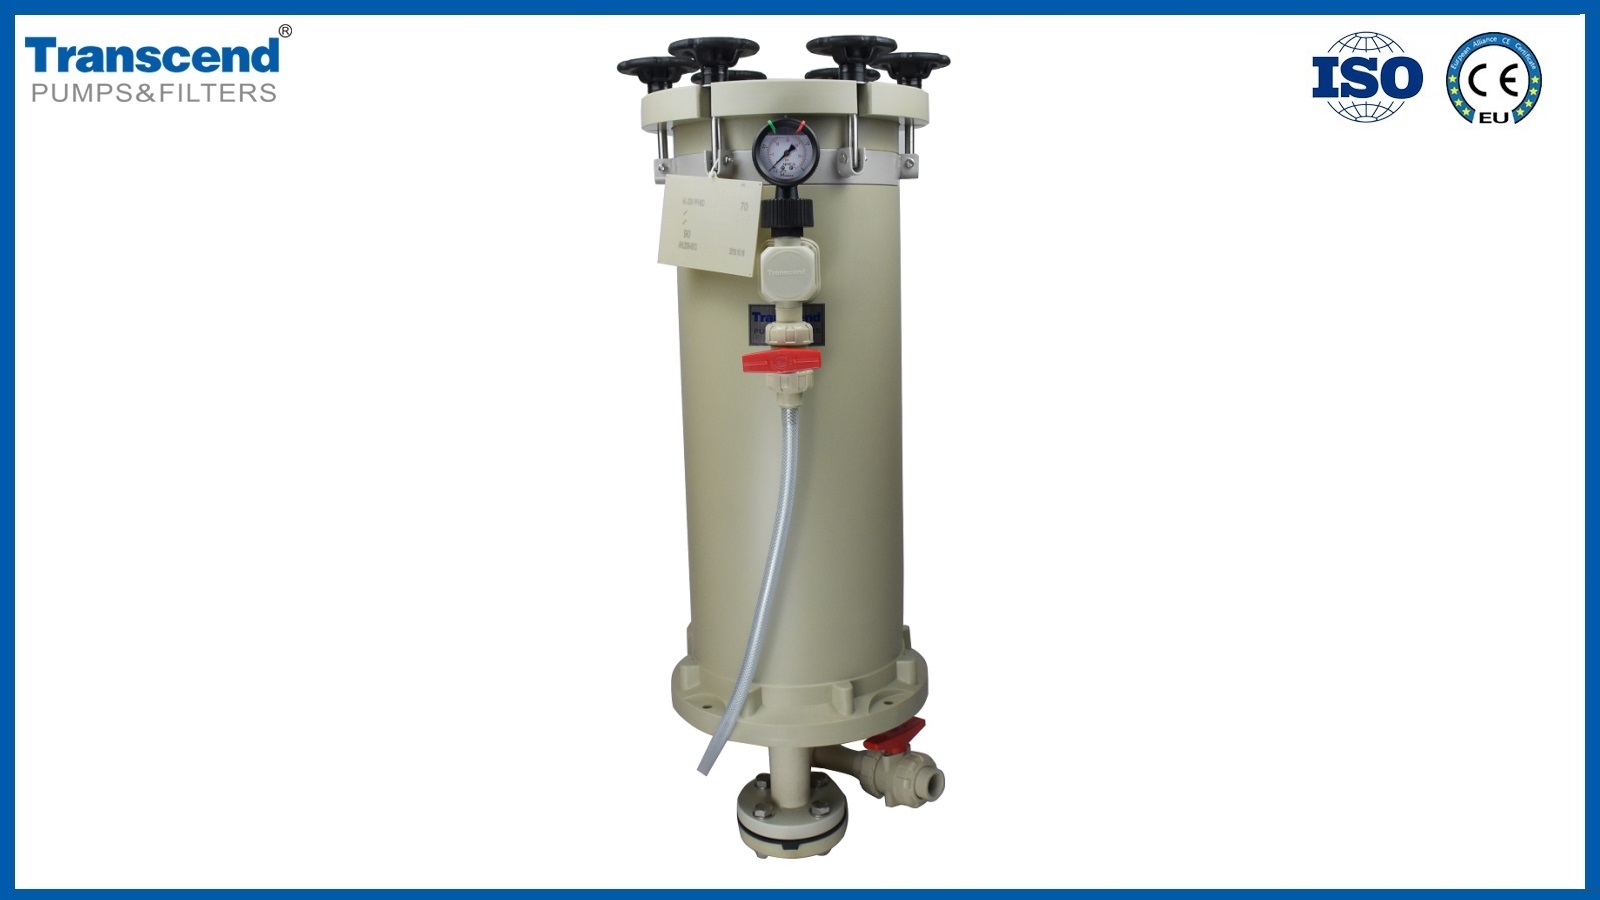  Best chemical filter housing Factory Price - Transcend 